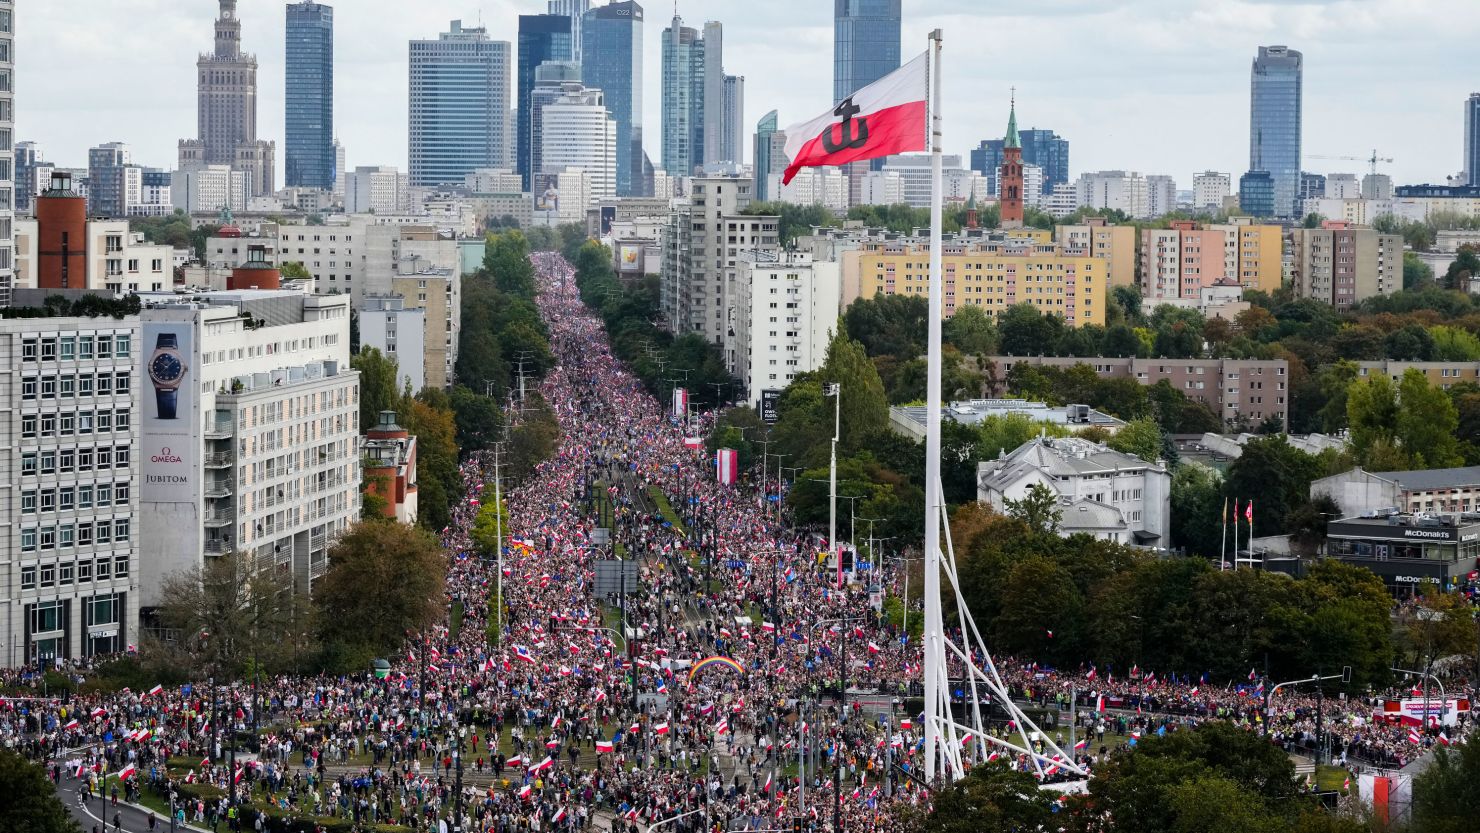 Thousands of people gather for a march in support of the opposition political party on Sunday.